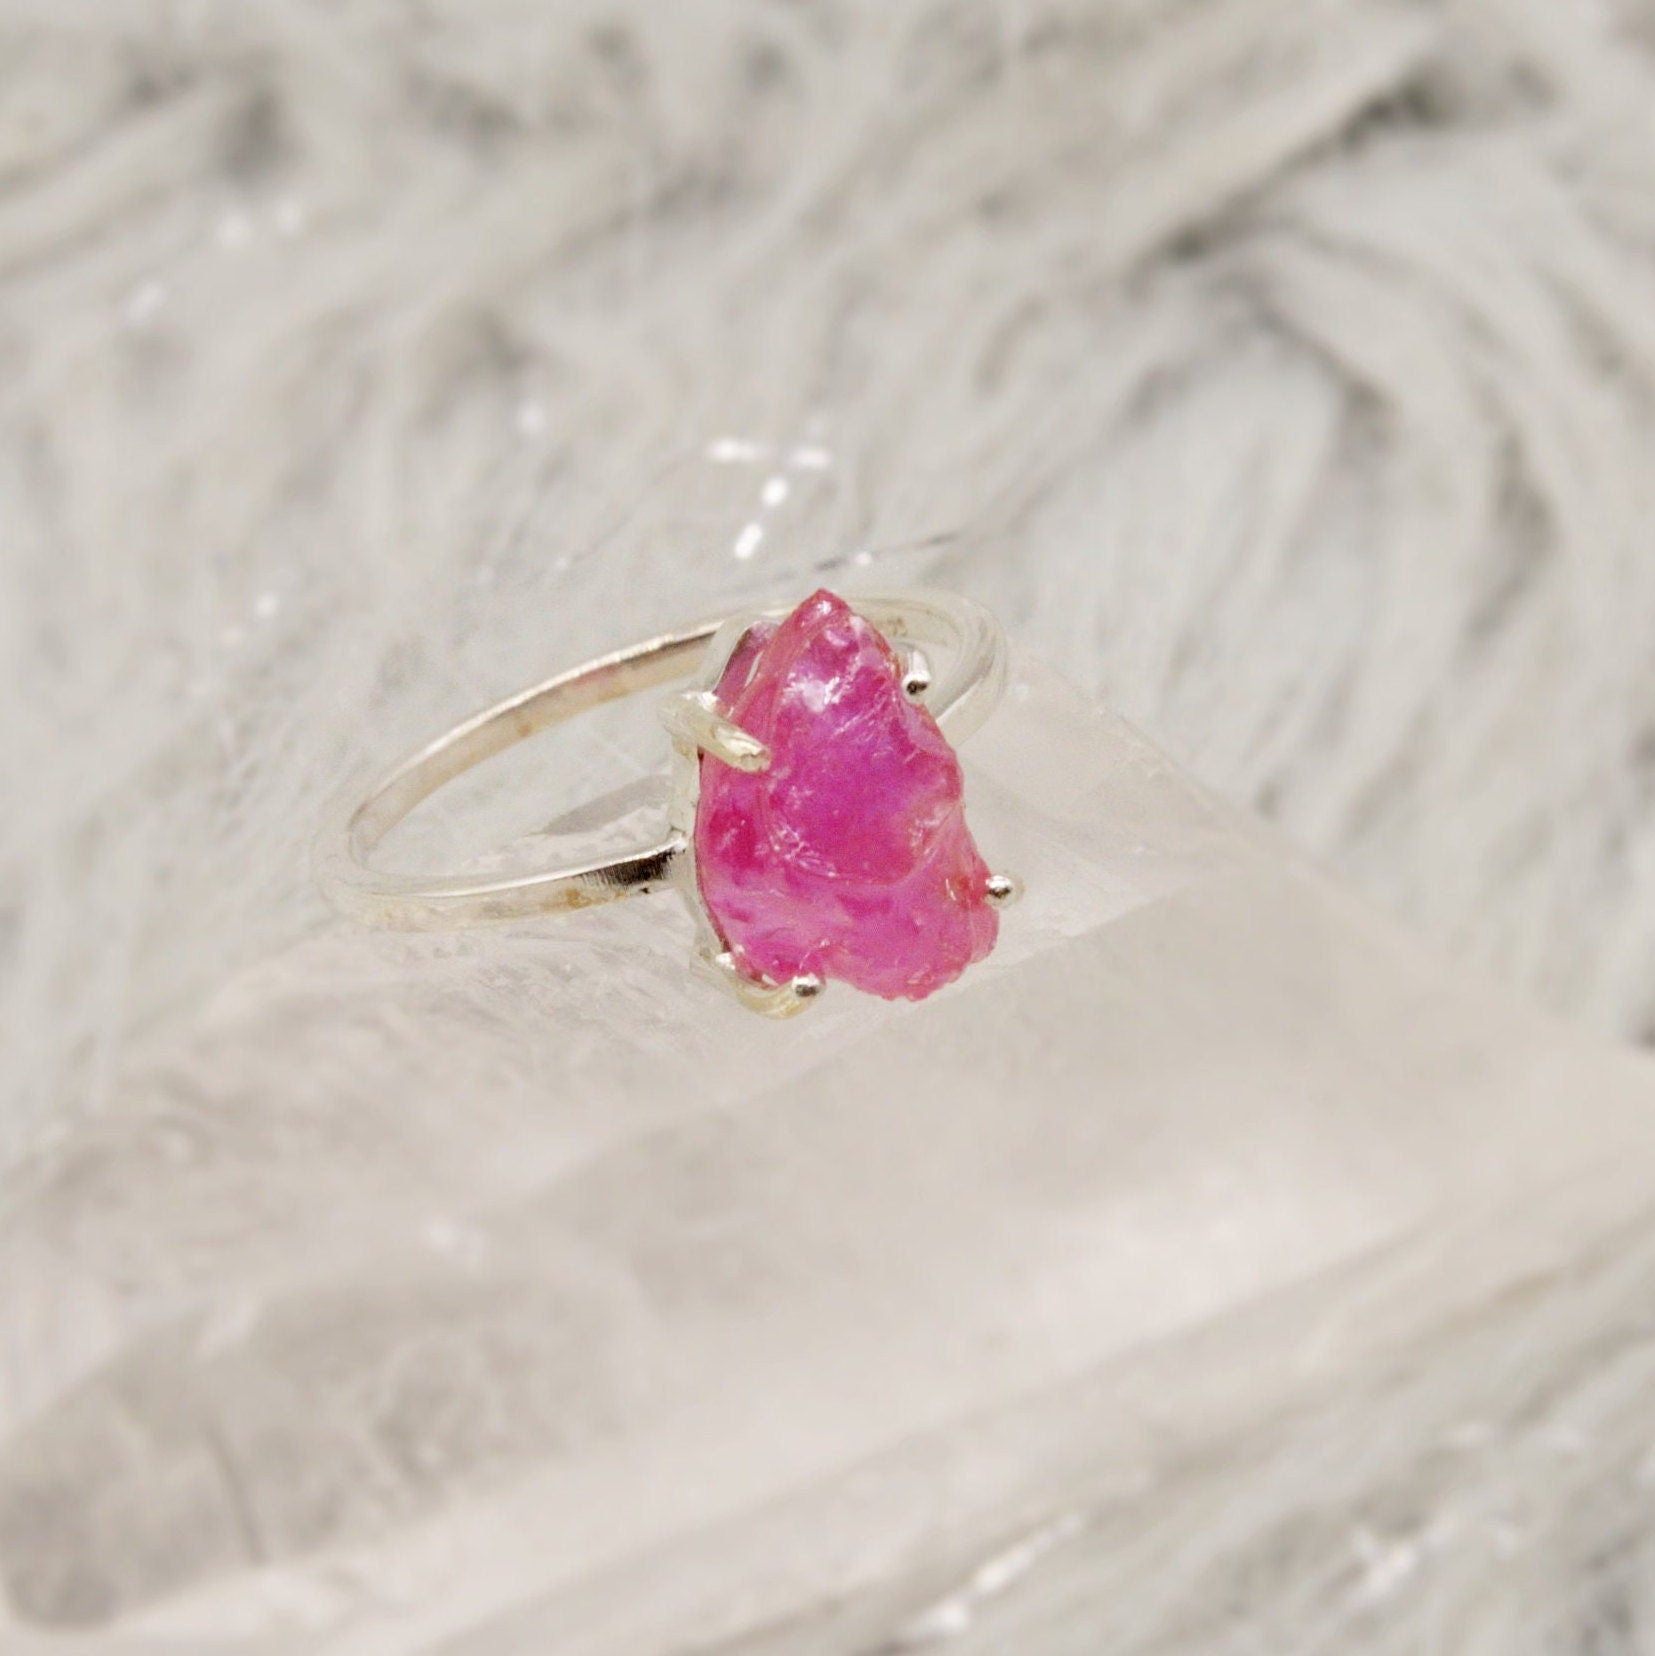 Raw Ruby Ring, Sterling Silver Dainty Red Gemstone Ring, UK size T, July Birthstone, Ruby Jewelry, Rings For Women, Birthday Gift